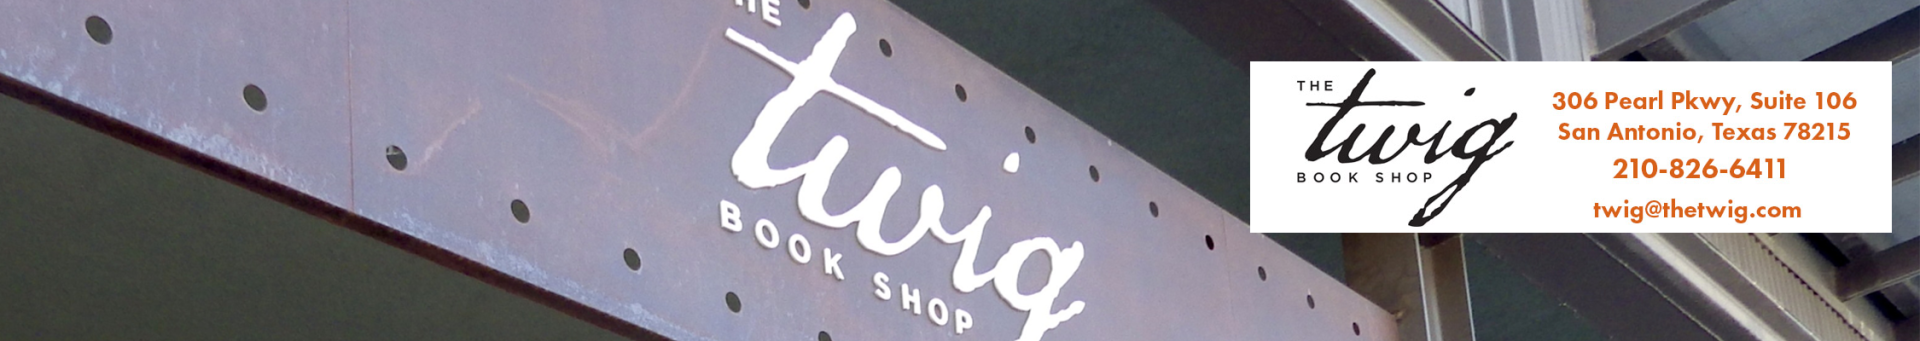 Gallery 3 - An Evening with Friends at The Twig Book Shop